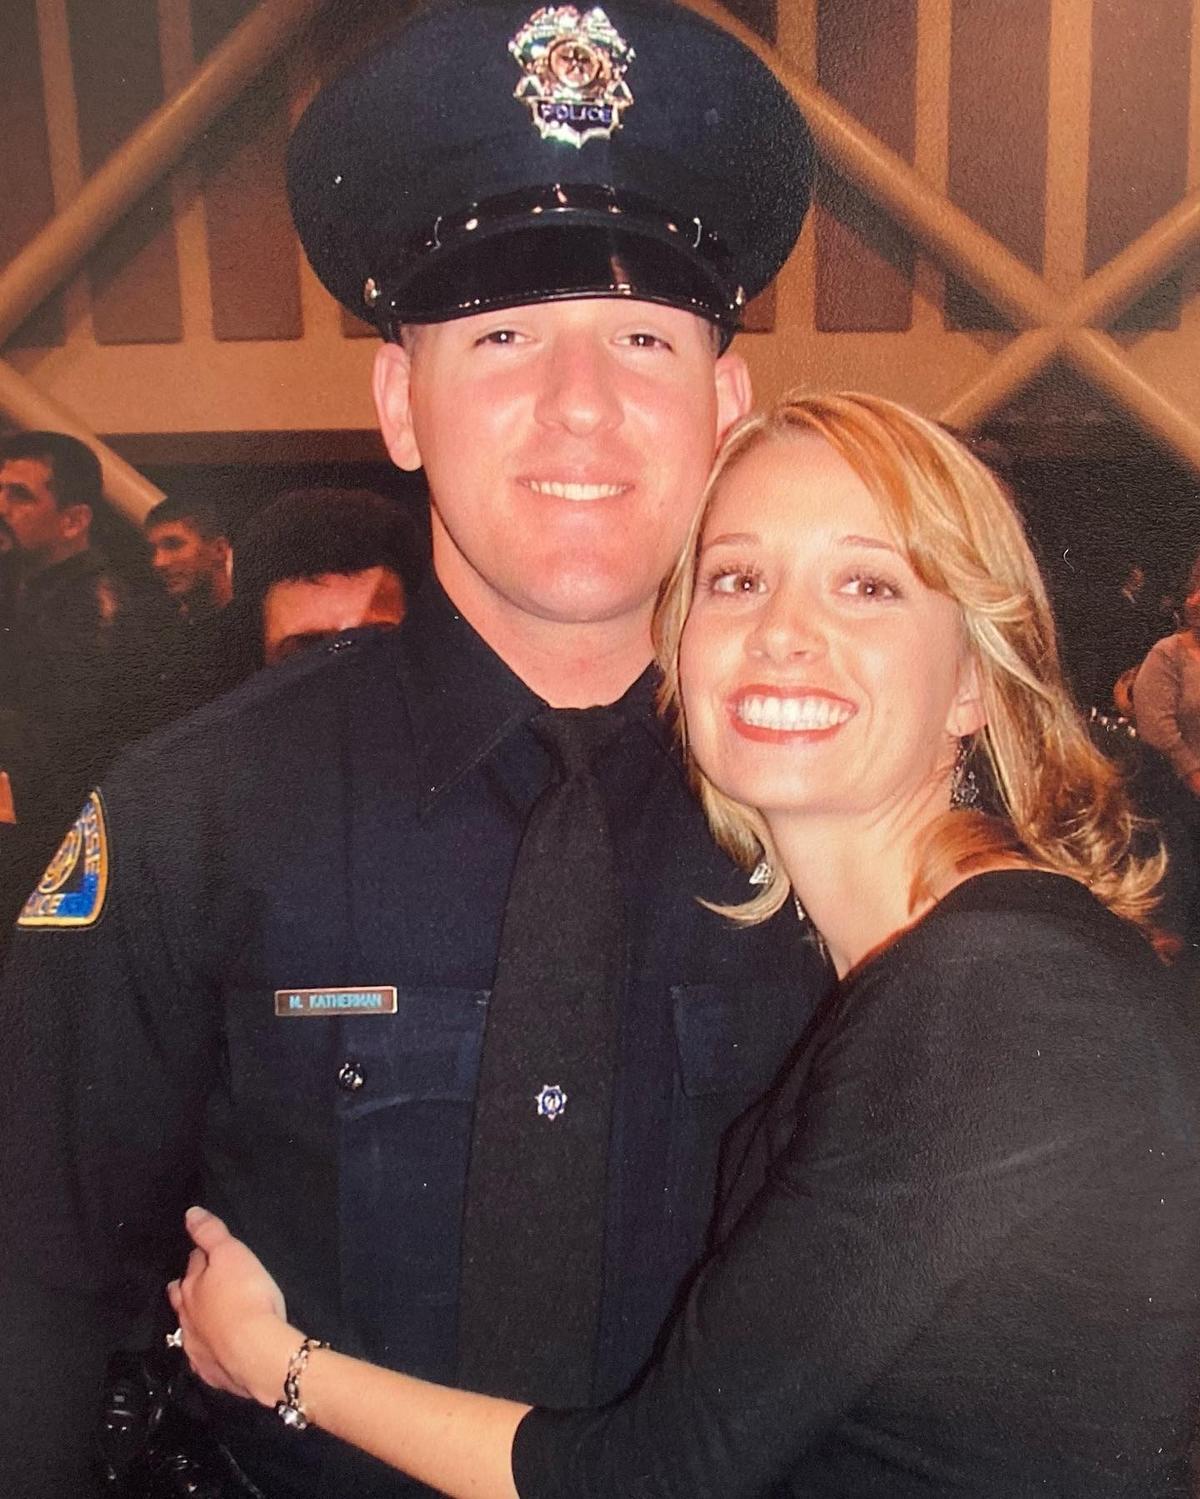 April with Mike on the day he graduated from the San Jose Police Academy. April was pregnant with their first baby boy in this picture. (Courtesy of <a href="https://www.instagram.com/beautyforourashesblog/">April Katherman-Redgrave</a>)